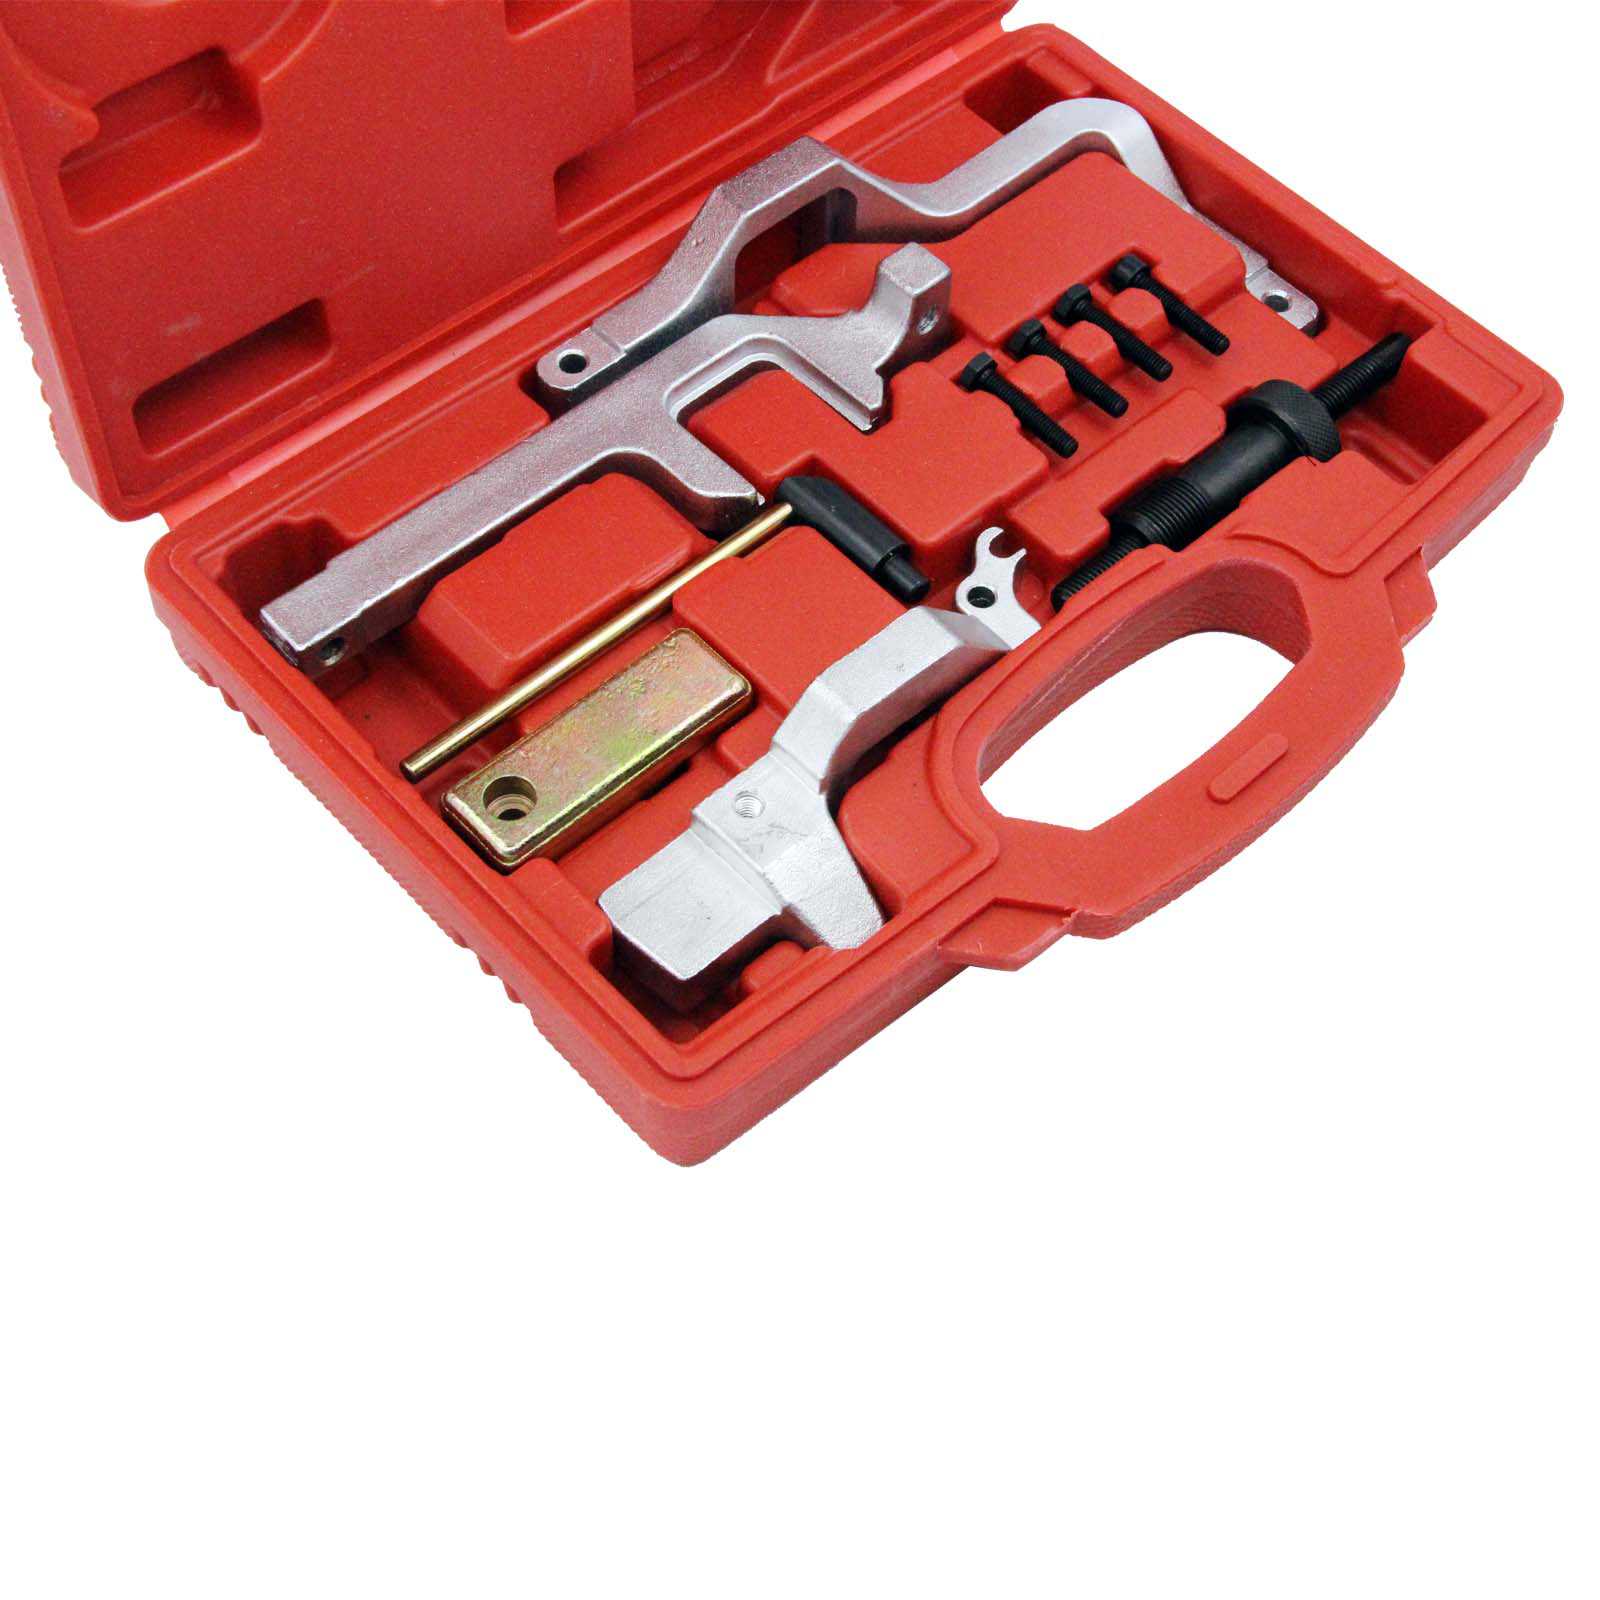 Special Engine Camshaft Alignment Timing Tool Kit R55 for Mini Cooper N12 N14